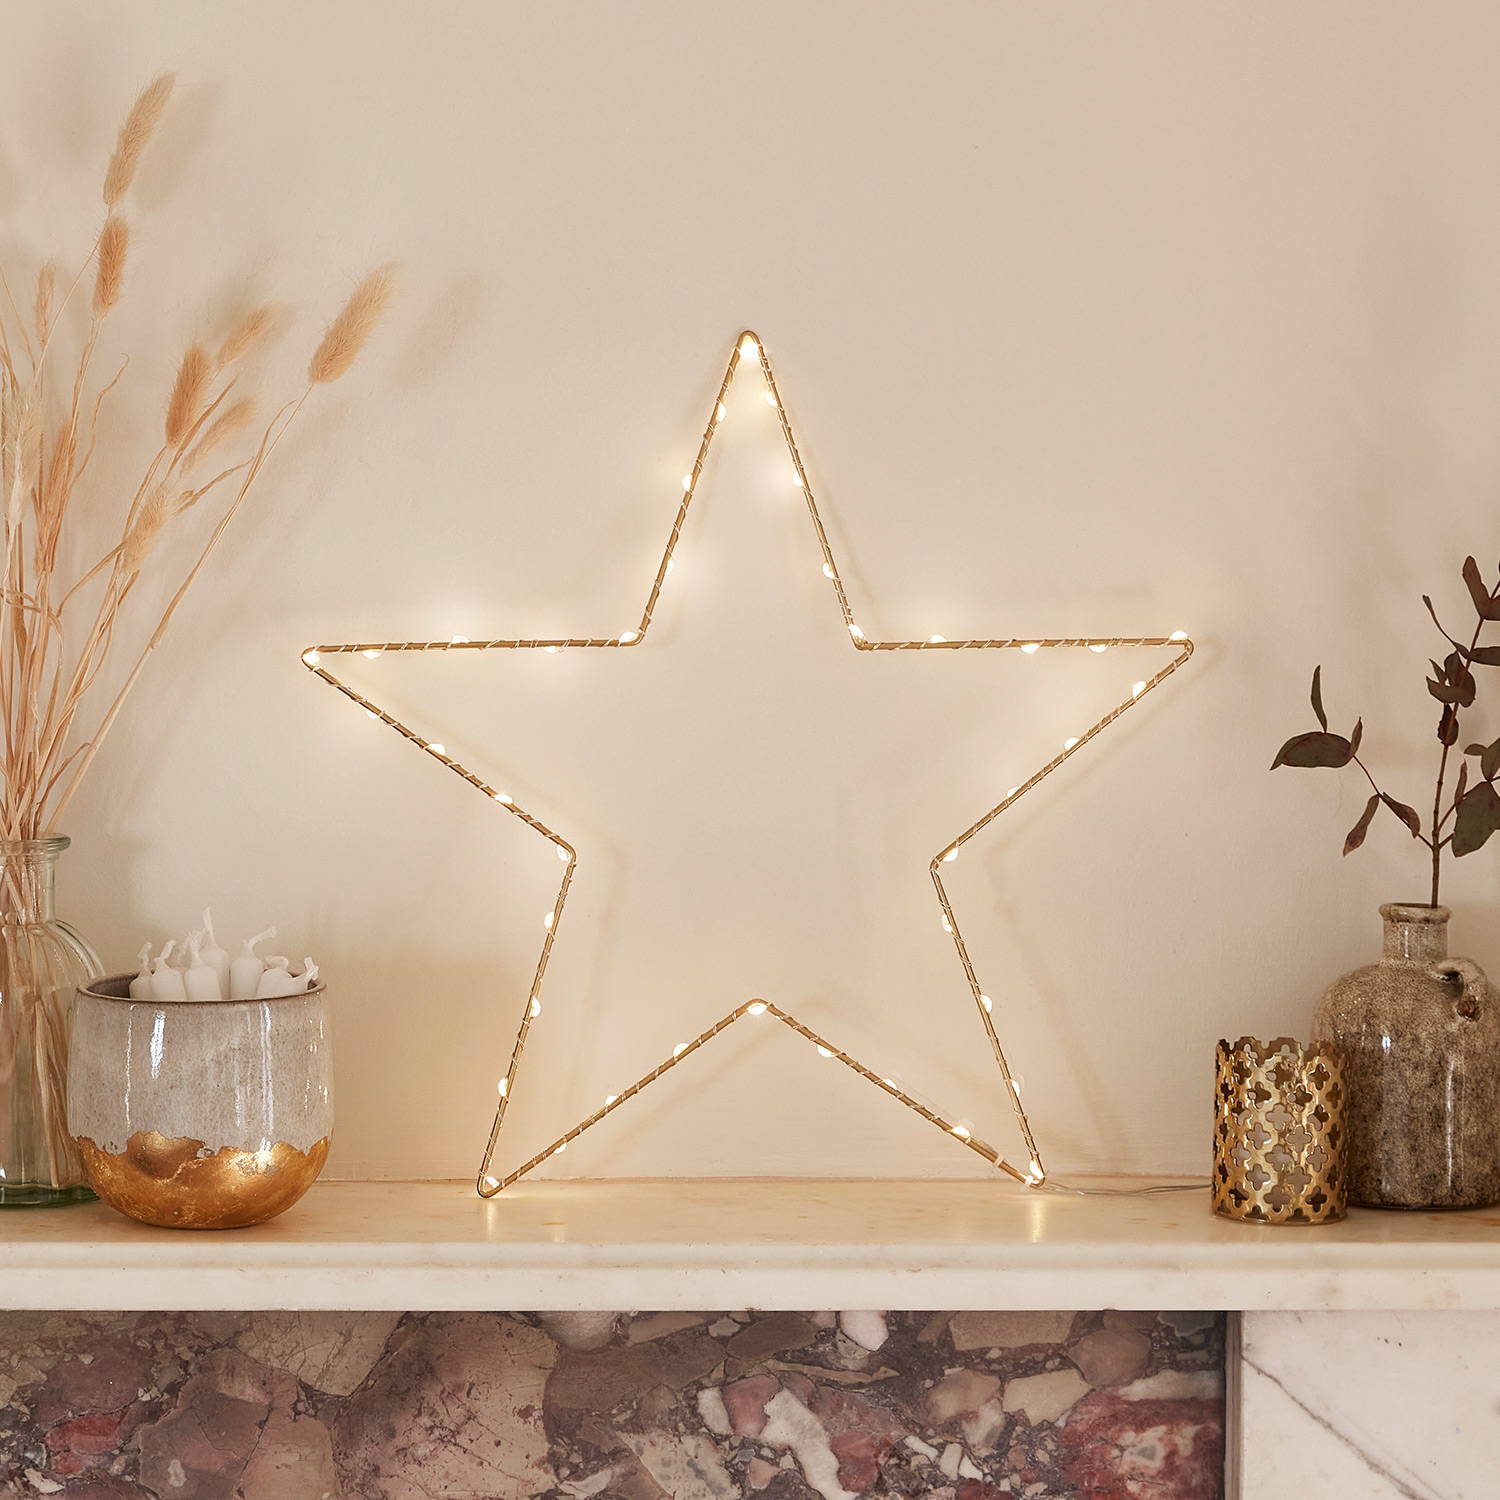 Gold Osby star on a mantlepiece with other ornaments and dried flowers.